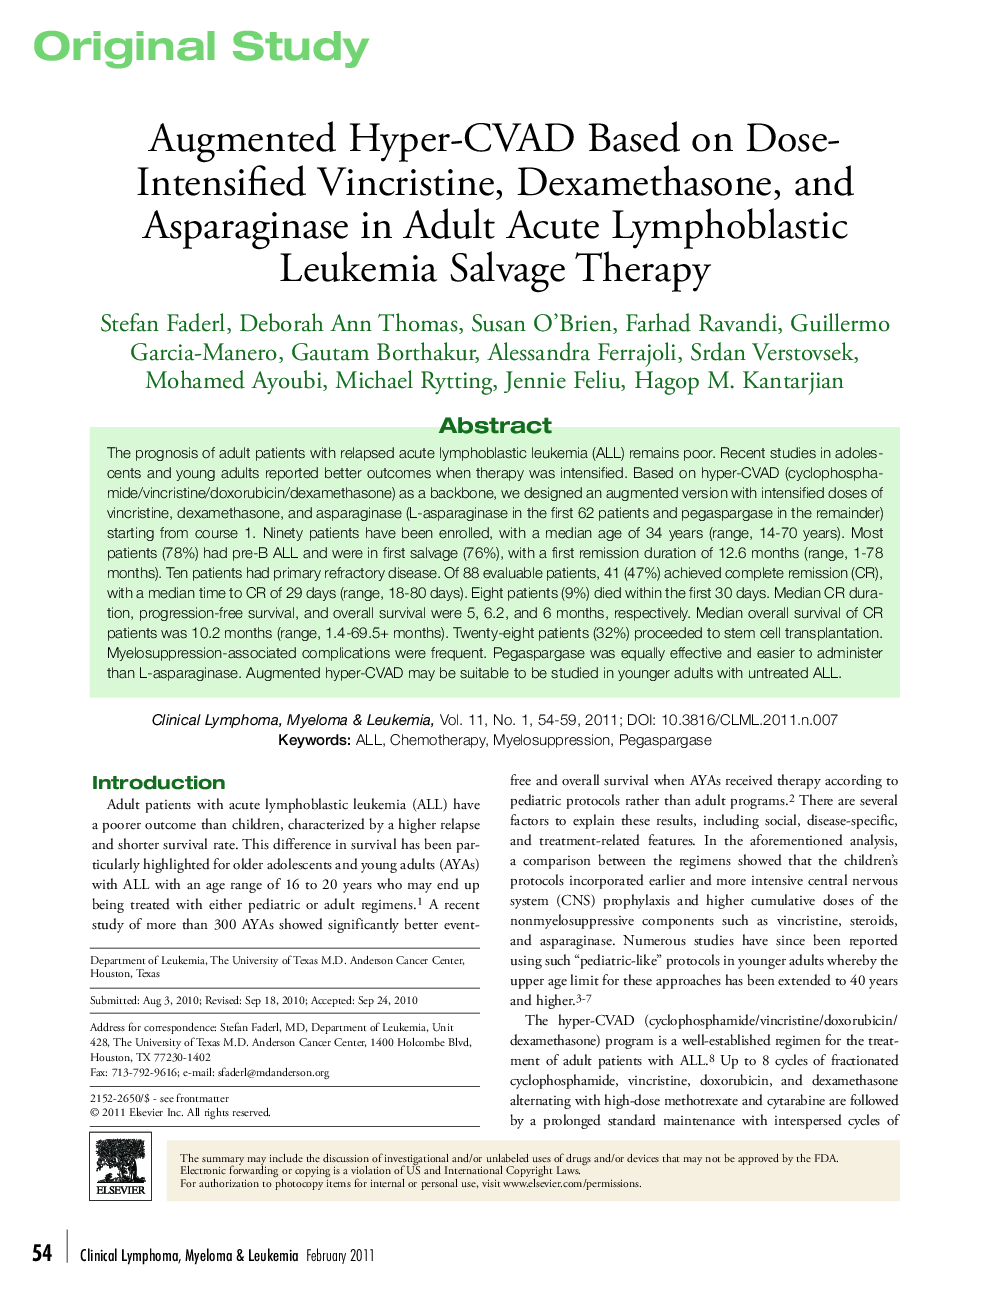 Augmented Hyper-CVAD Based on Dose-Intensified Vincristine, Dexamethasone, and Asparaginase in Adult Acute Lymphoblastic Leukemia Salvage Therapy 